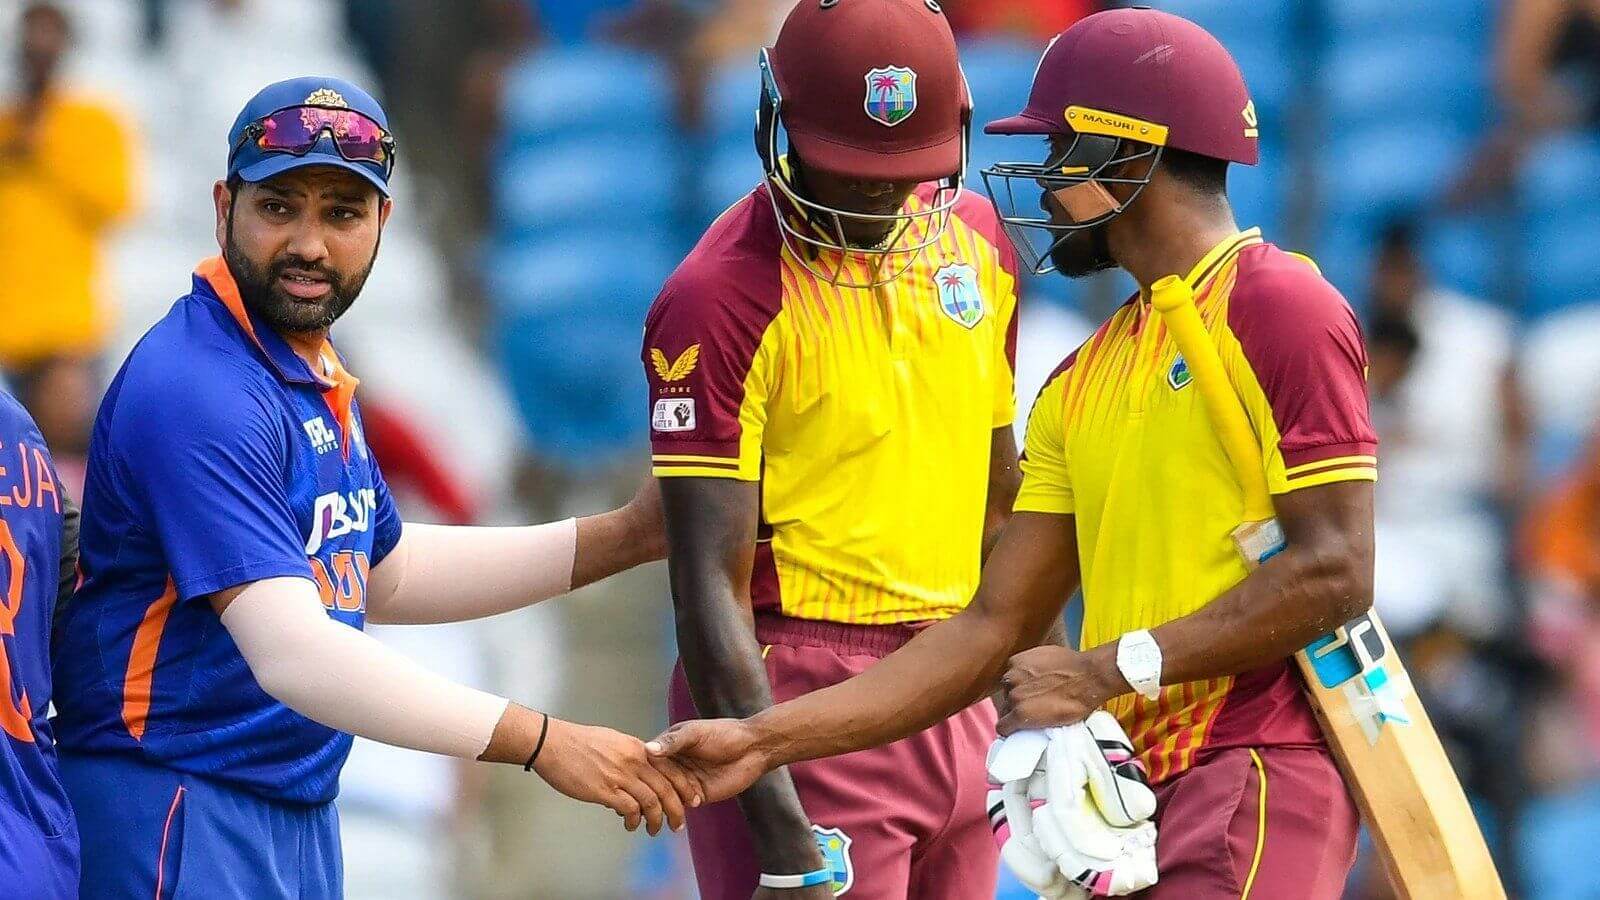 4th and 5th T20I matches of India vs West Indies in Florida to go ahead after teams received USA visas